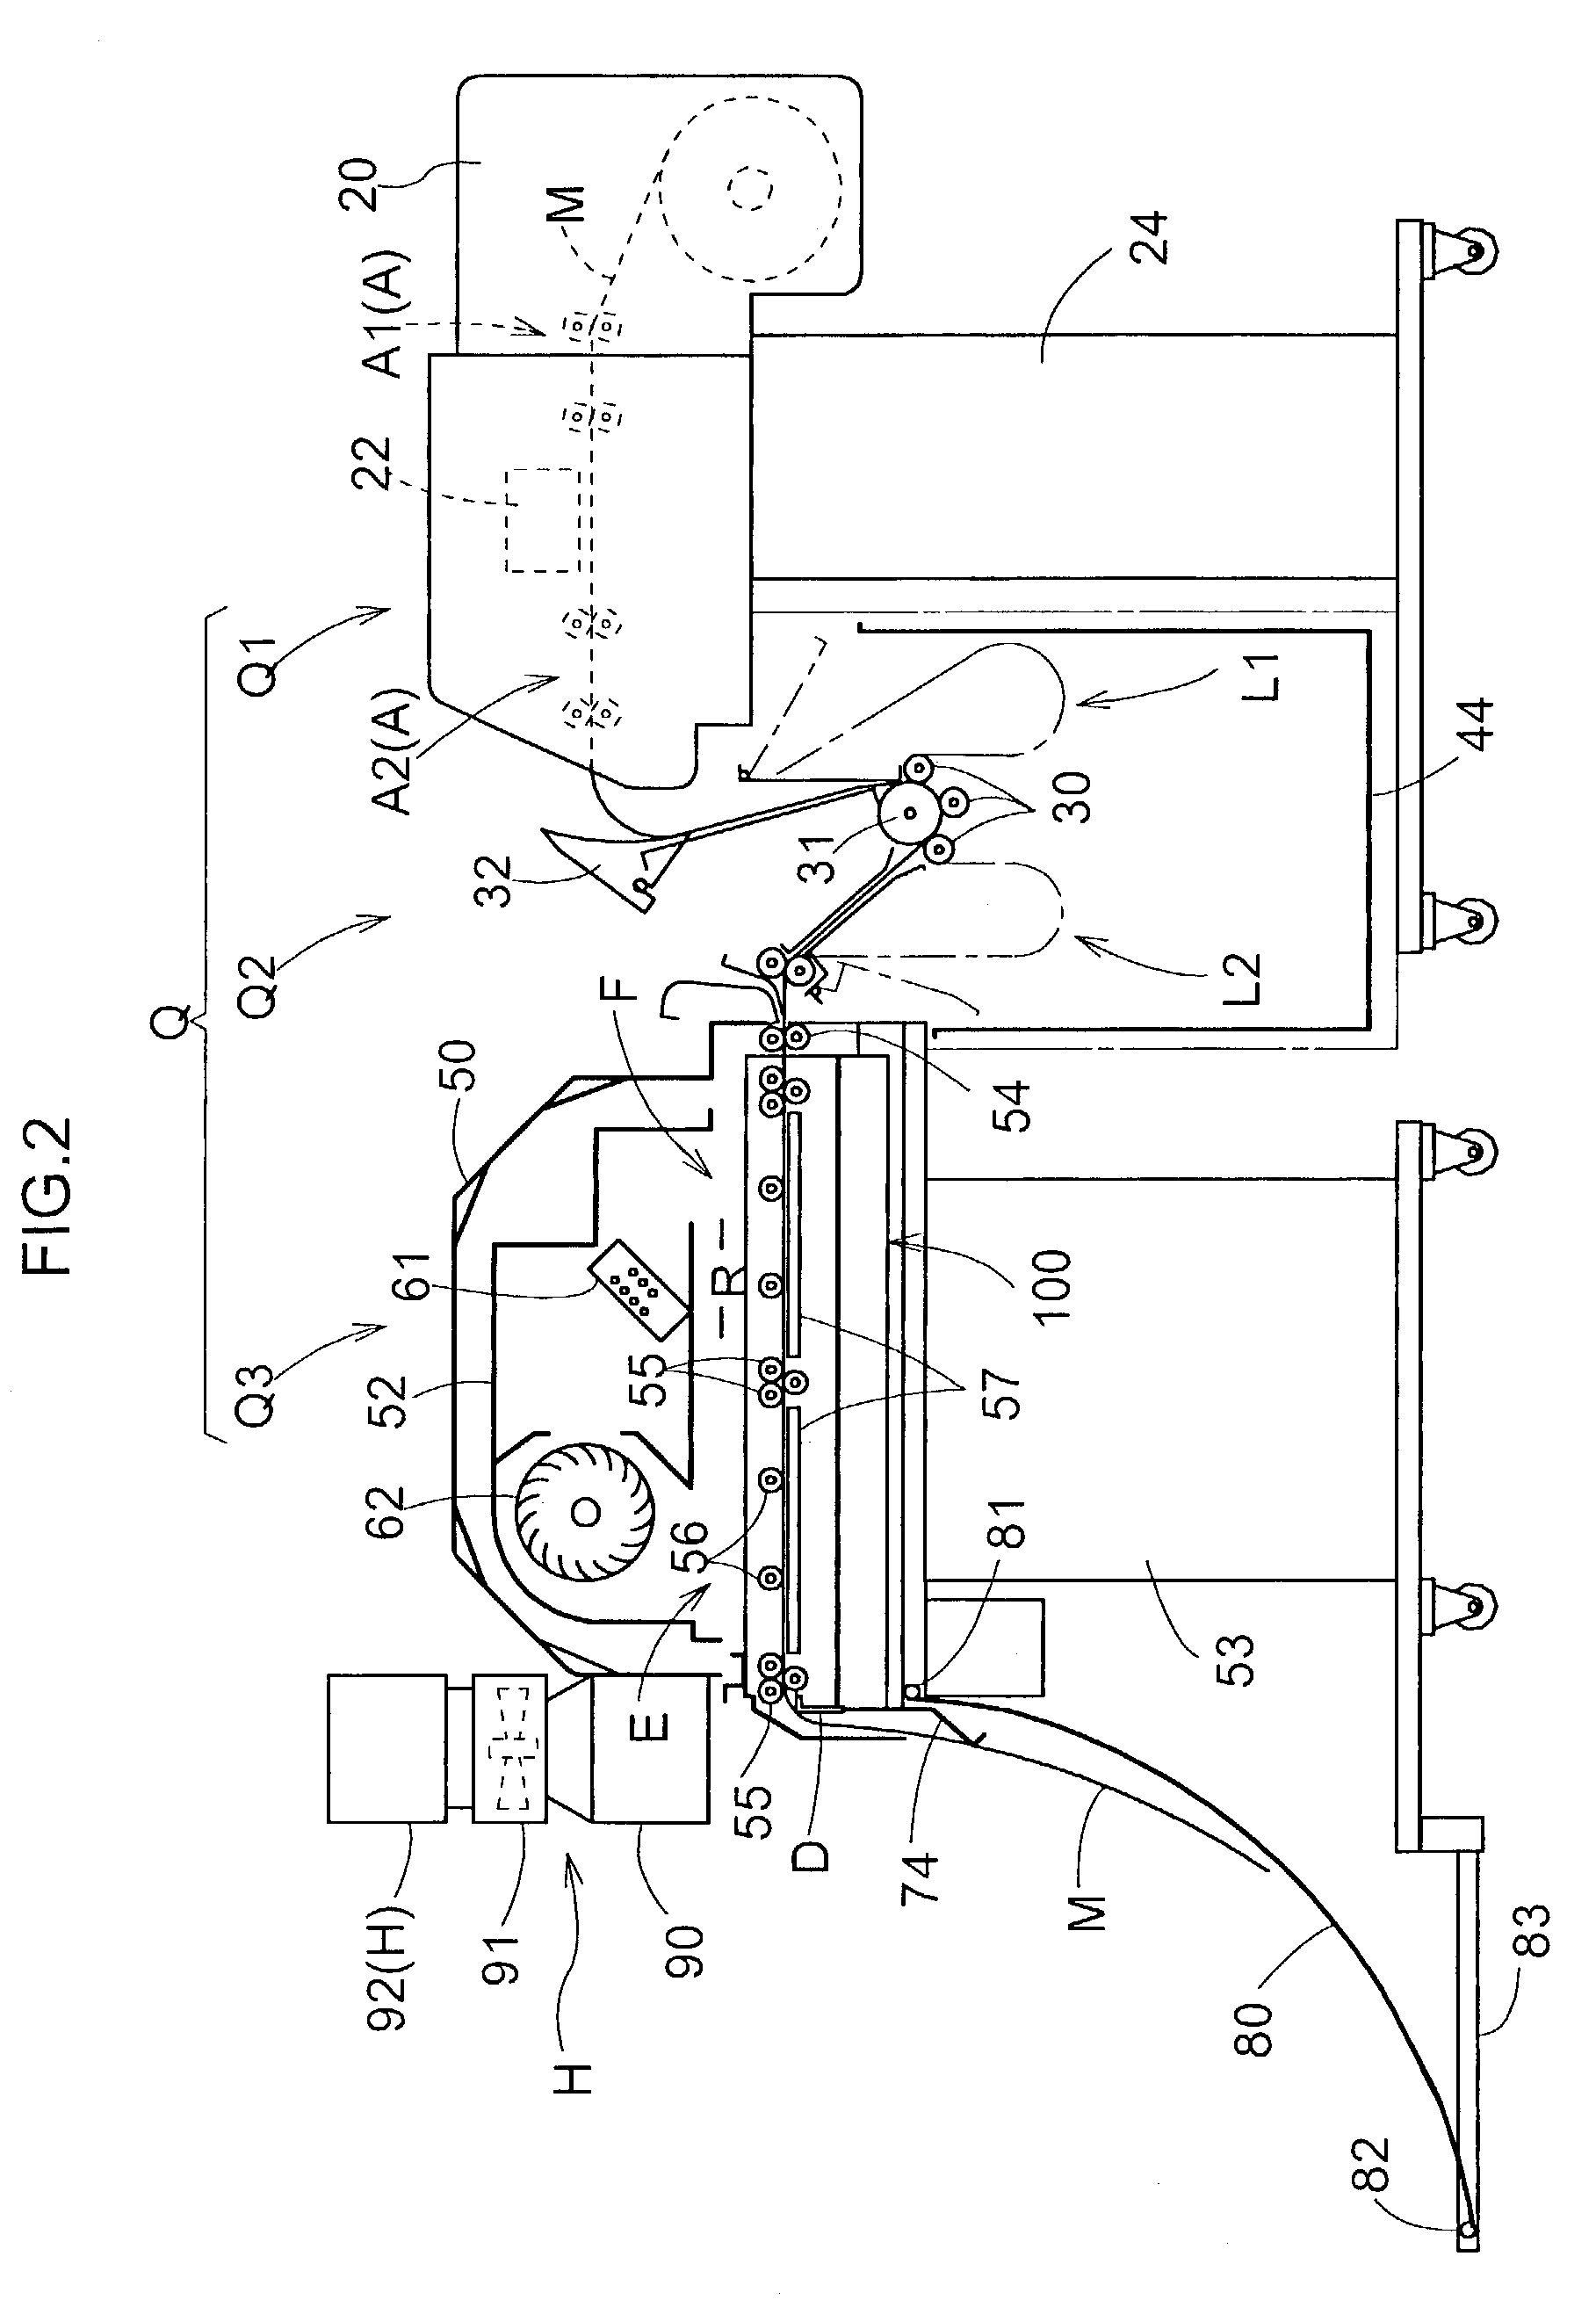 Heat fixing apparatus for sublimating and fixing sublimating ink to recording medium